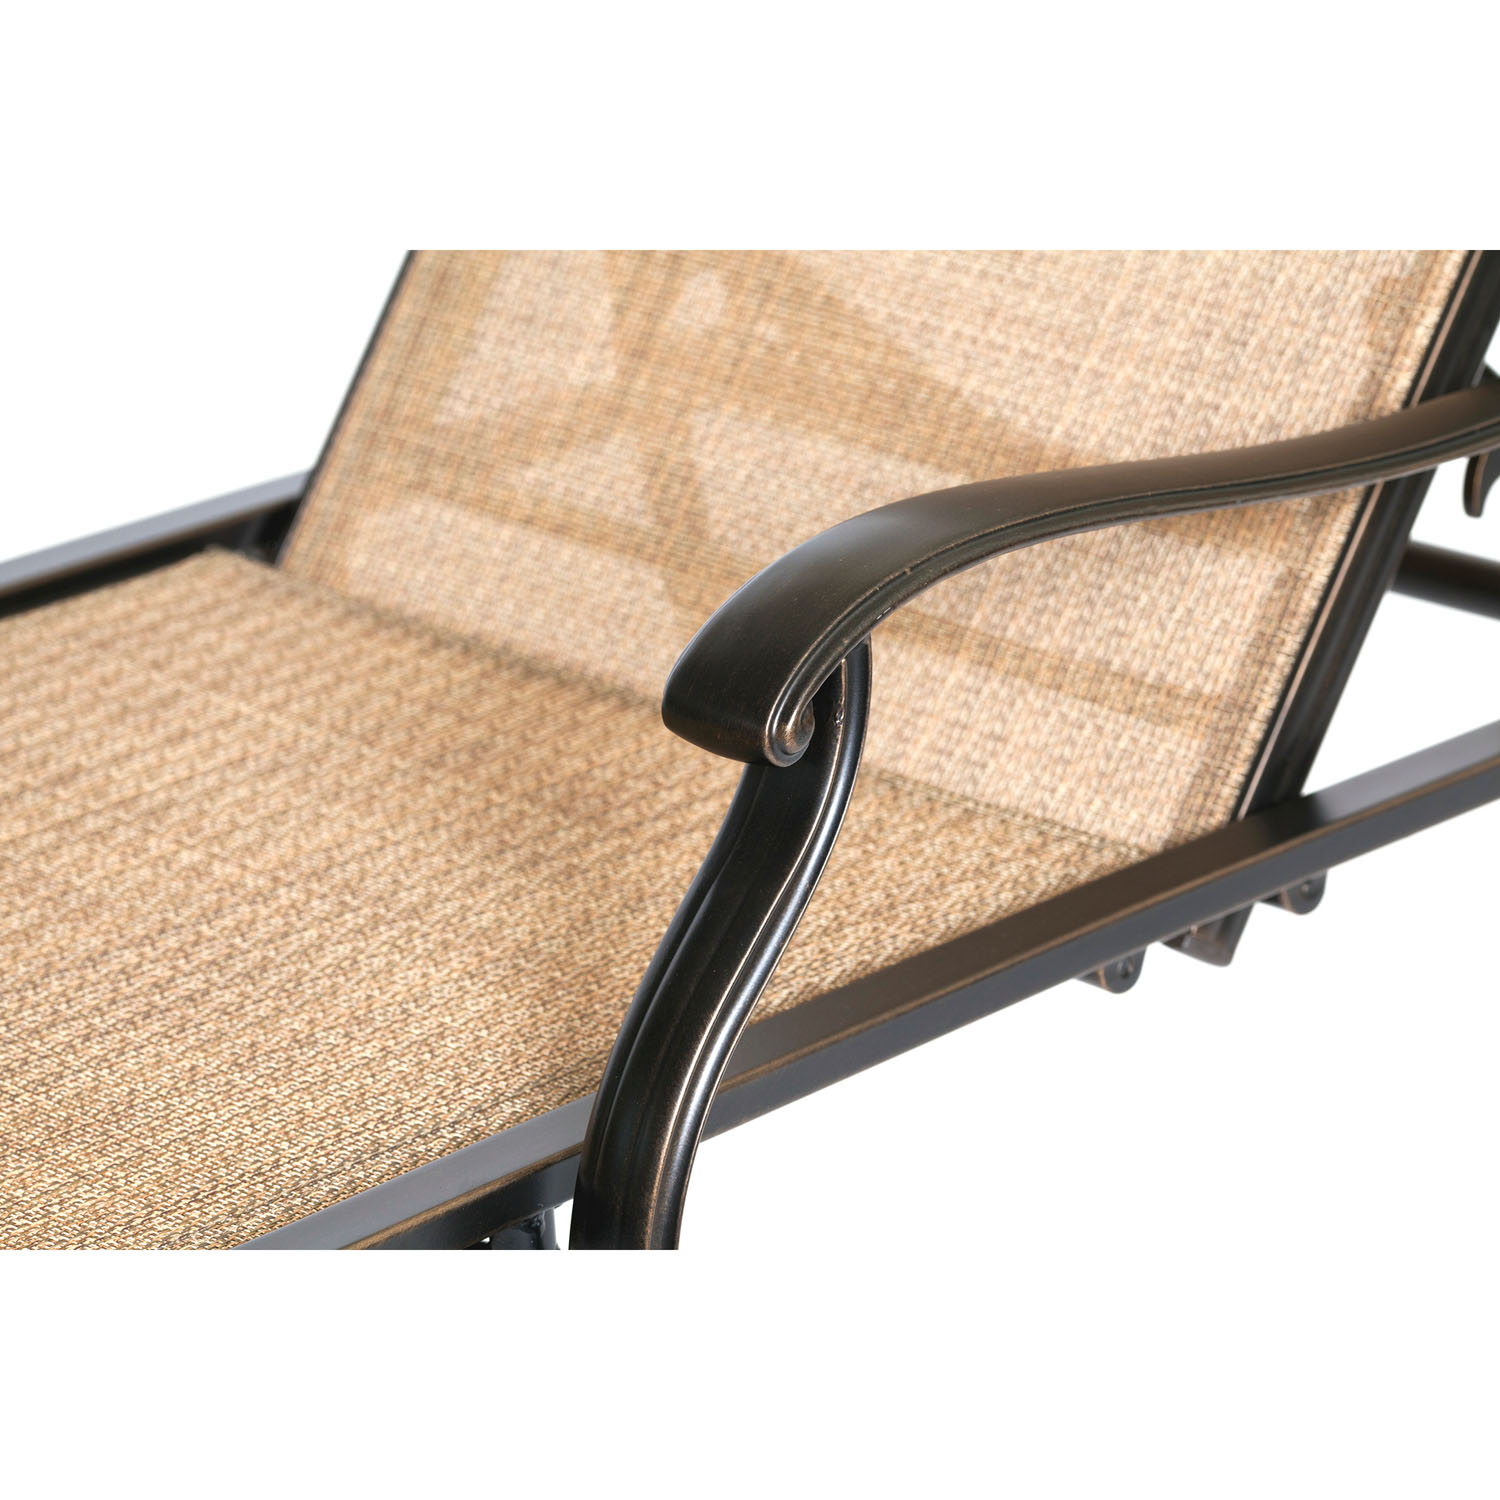 Hanover Monaco Outdoor Chaise Lounge Chair with Durable Sling Fabric and Rustproof Aluminum Frames | UV and Water-Resistant | MONCHS - image 4 of 6